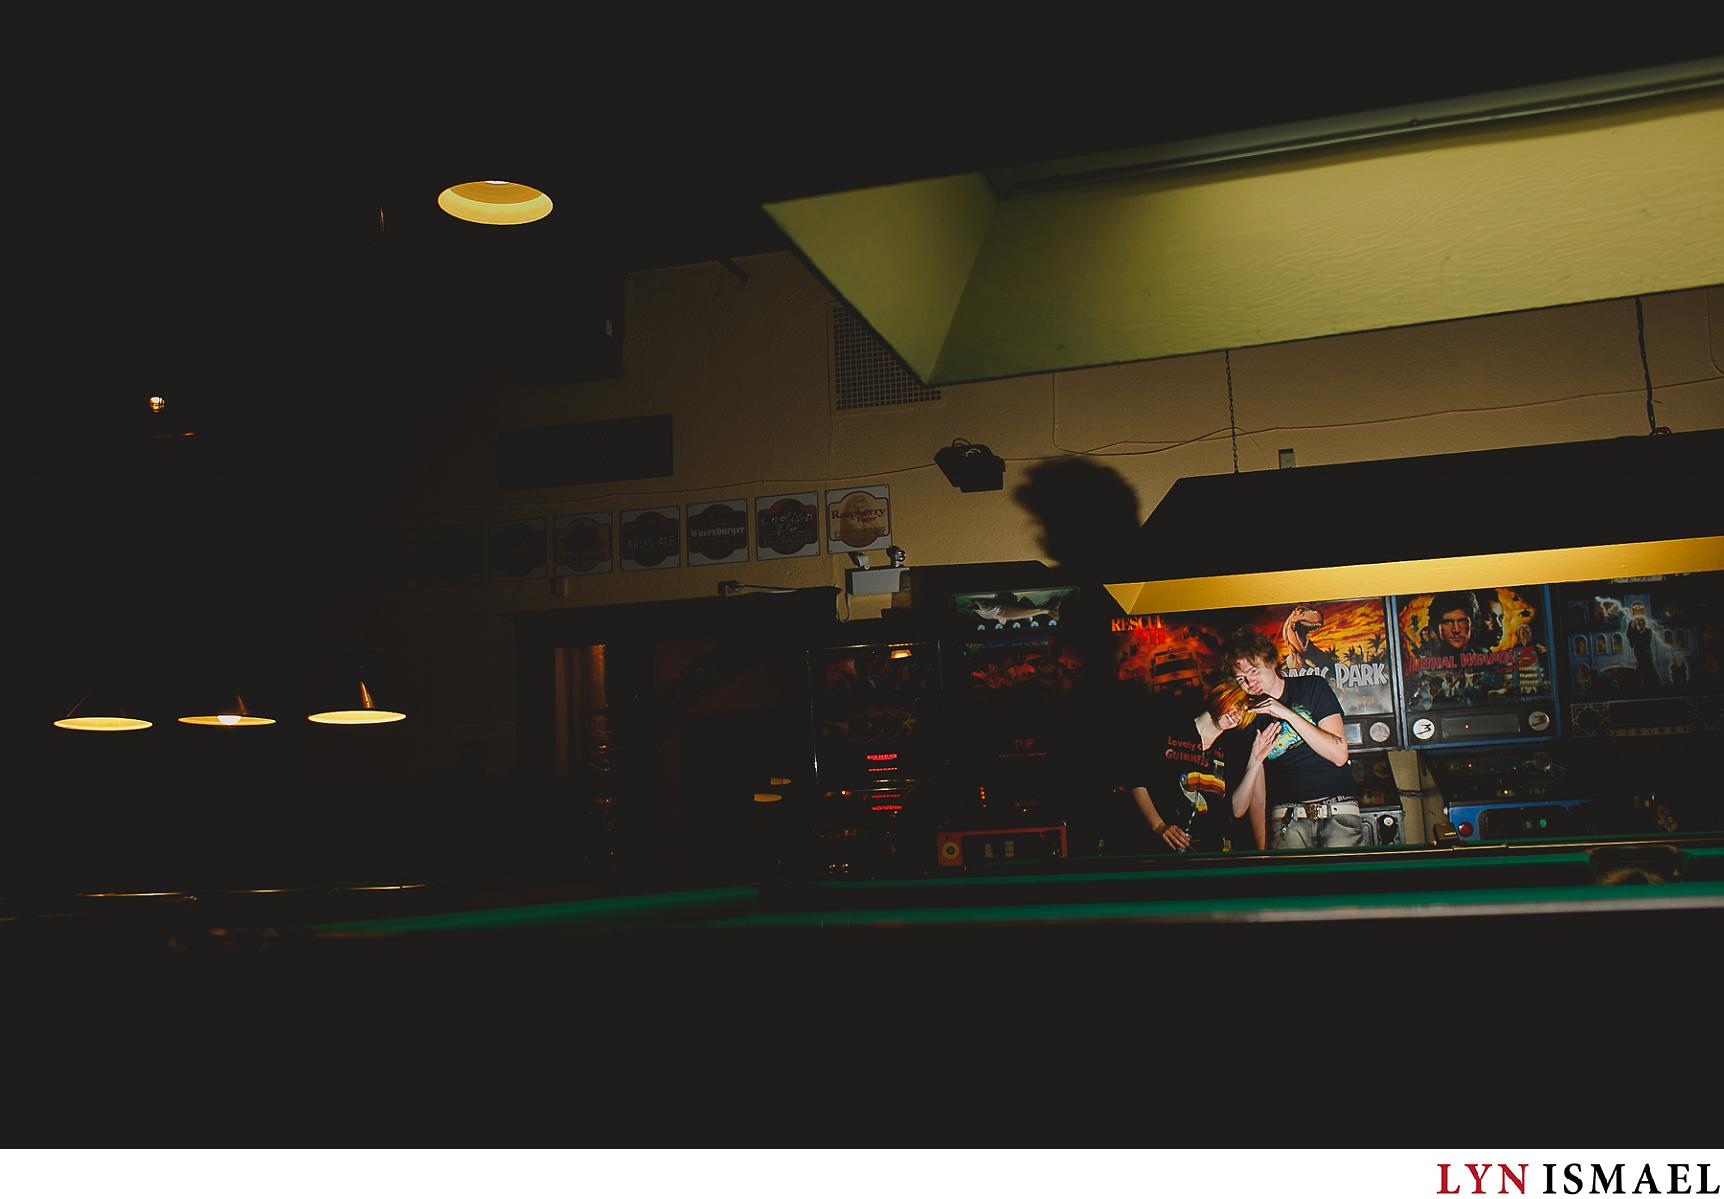 An engagement session in an arcade